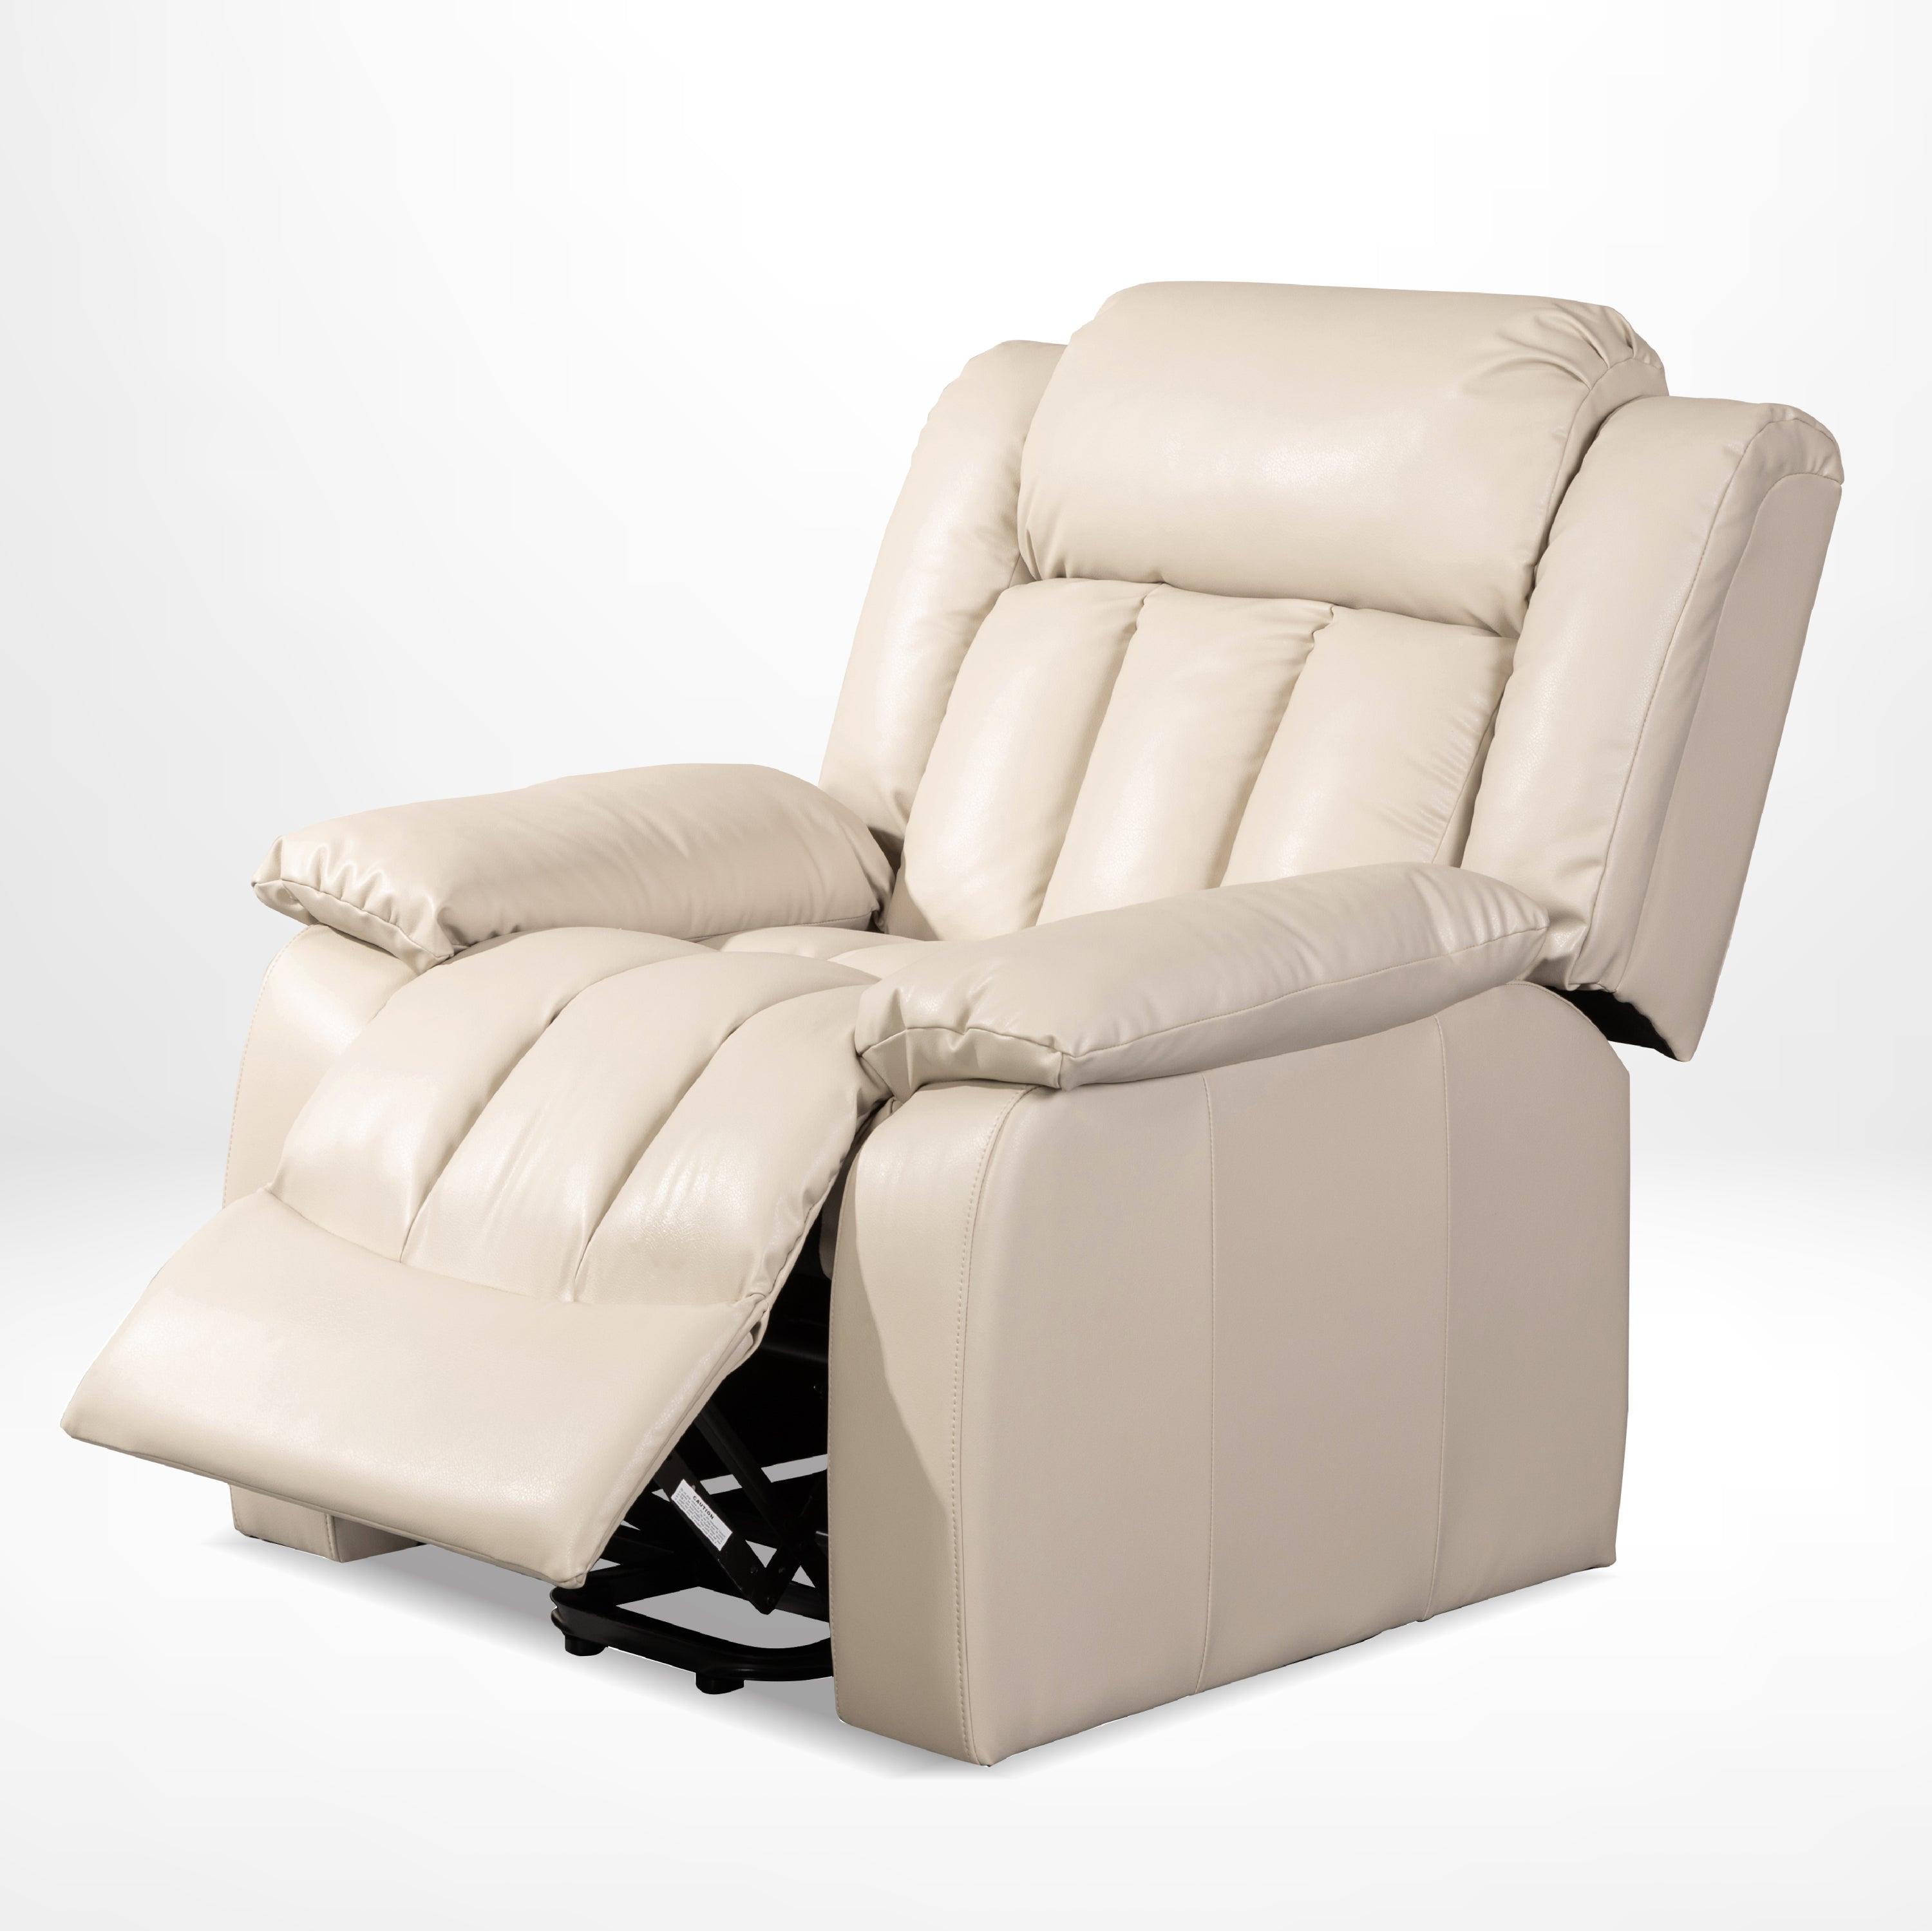 Power Lift Recliner Chair with Massage and Heating, Beige, partial recline angle